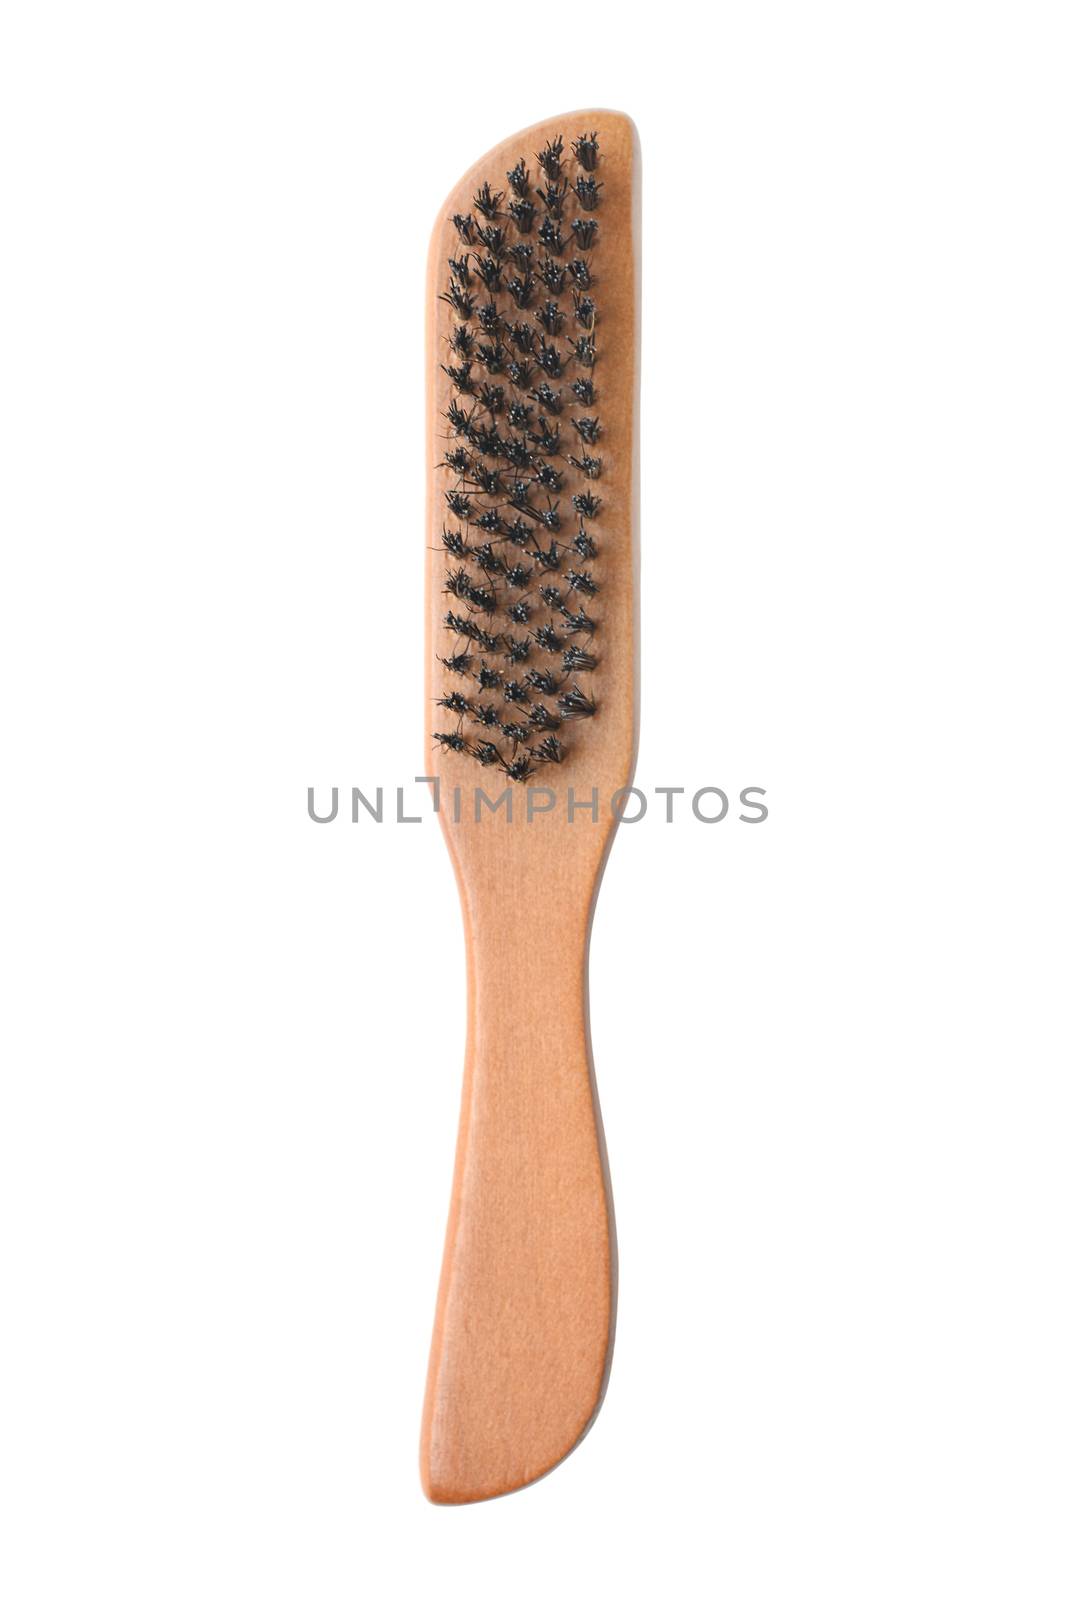 Hair beauty salon equipment comb brush with natural bristles, flat lay isolated on white background.